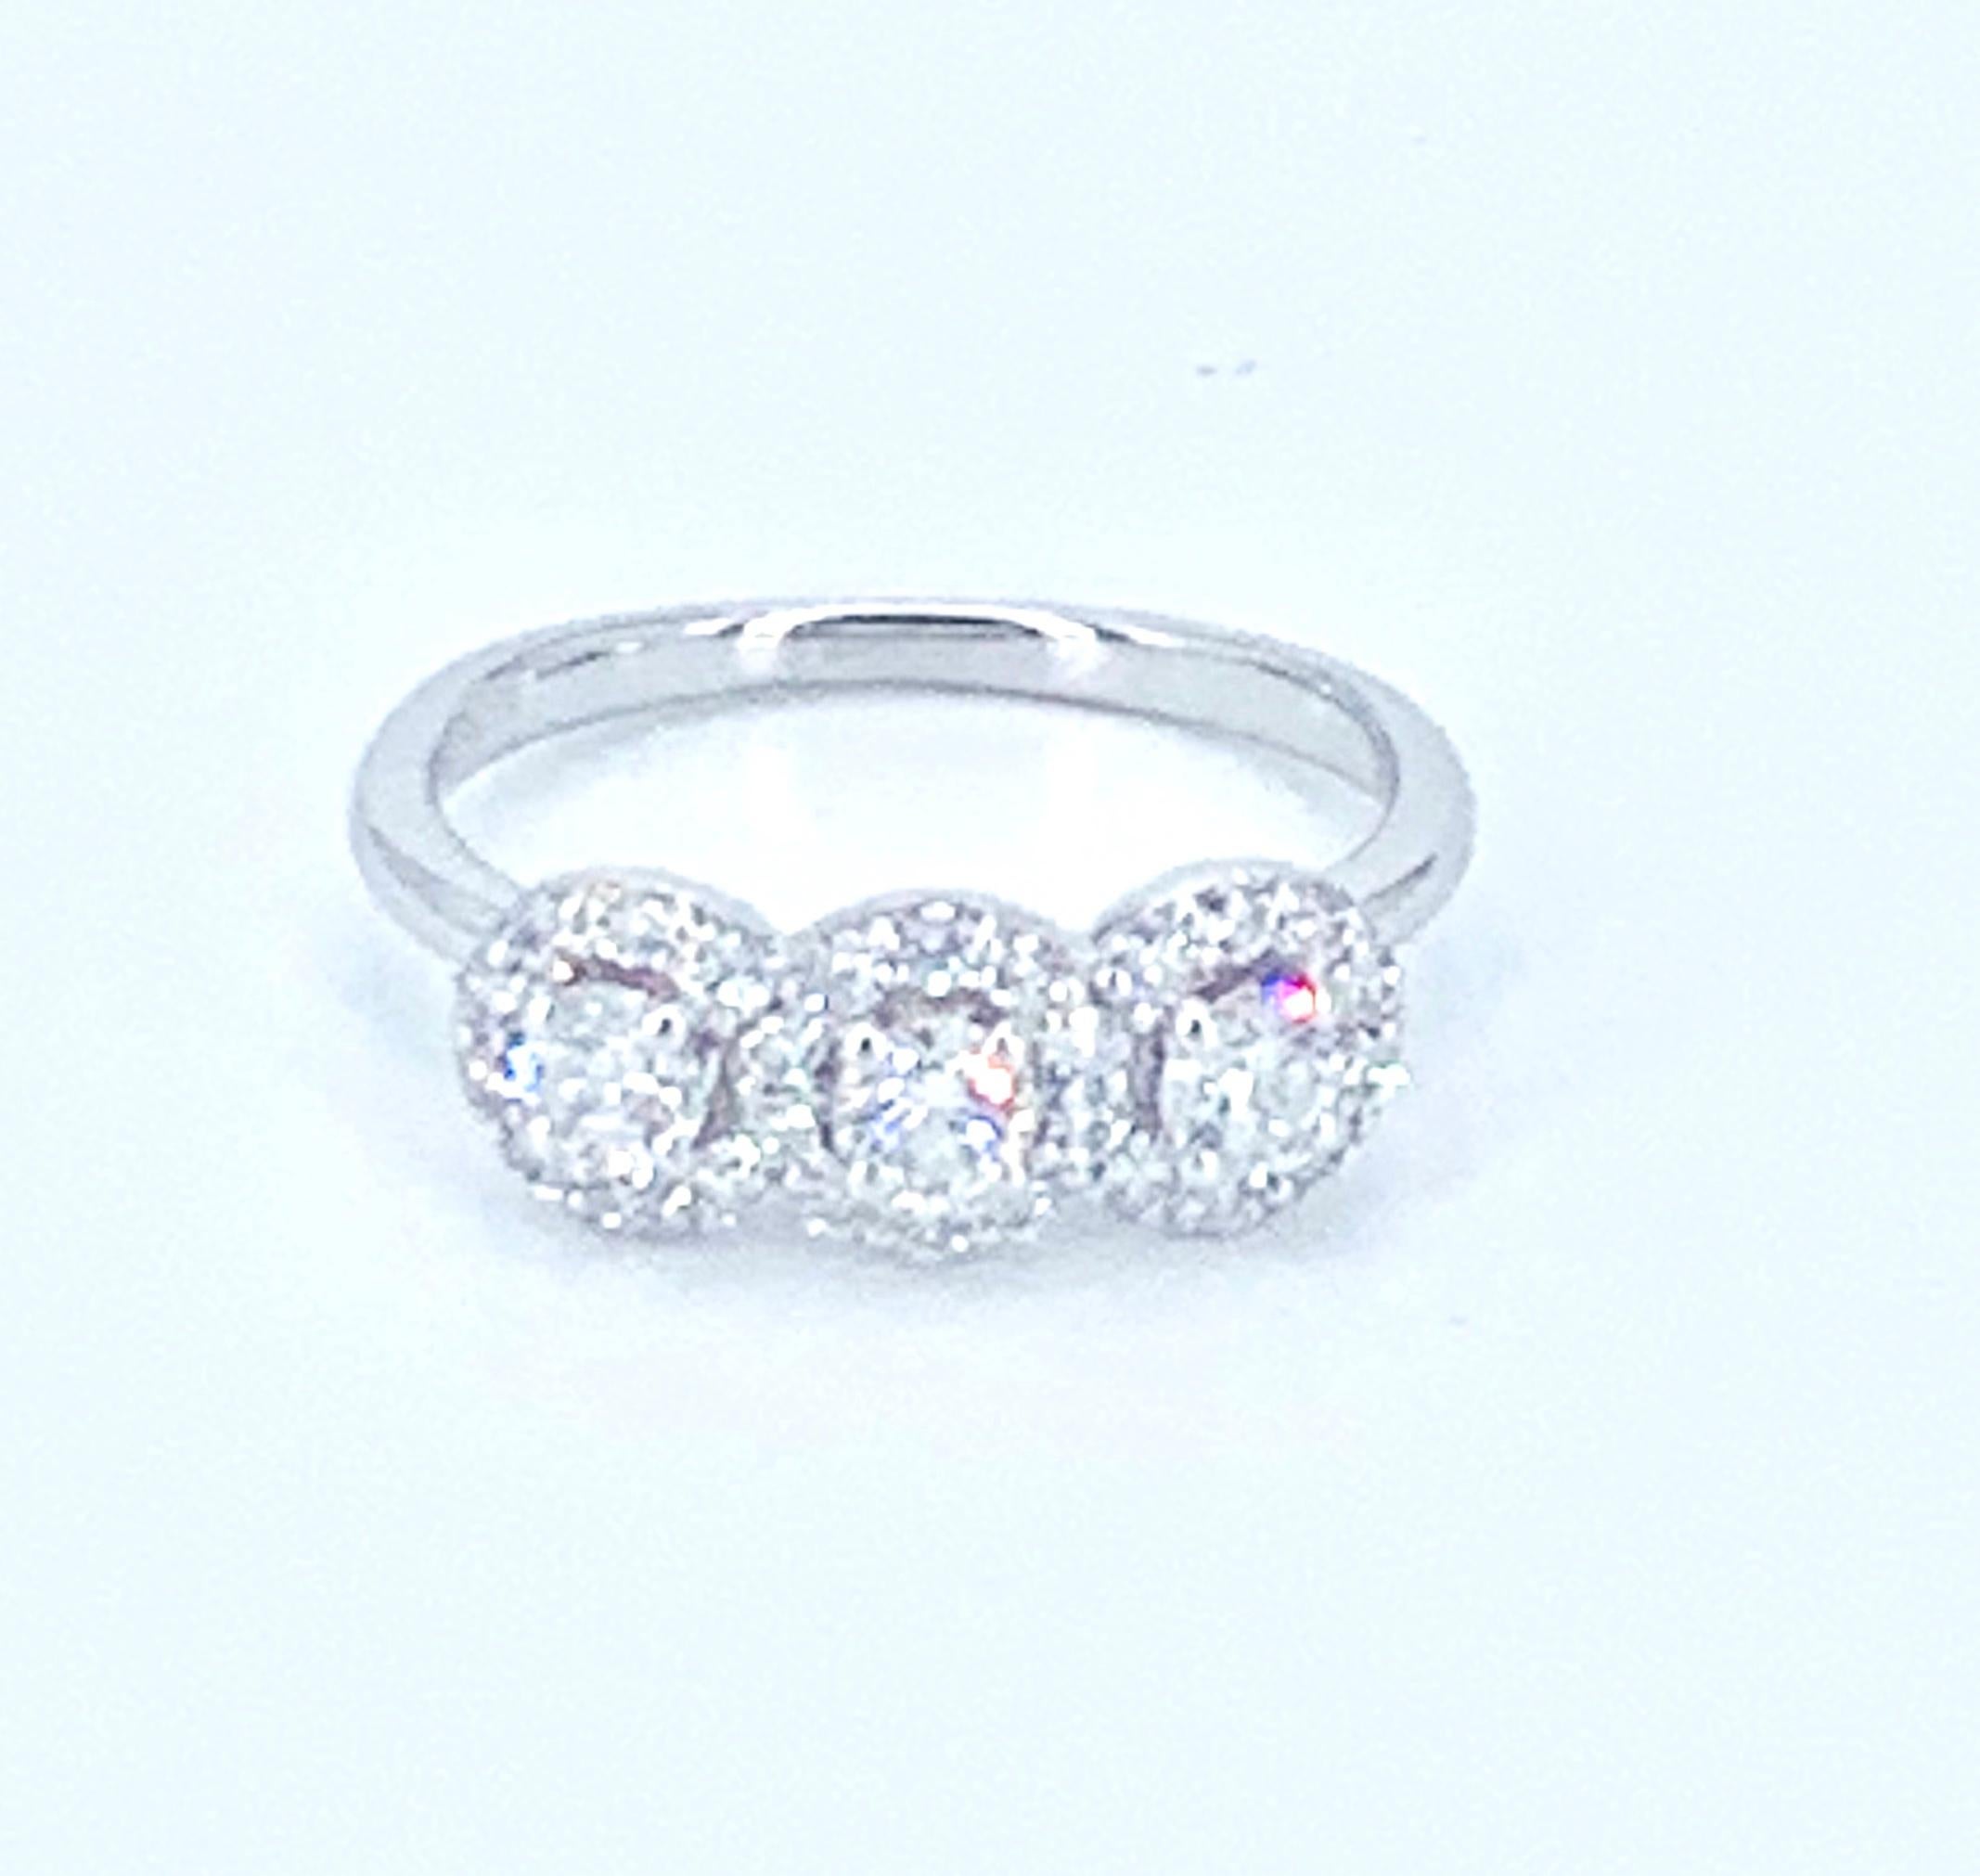 This beautifully bright 0.50 carat diamond Trilogy ring, illuminates the finger with the halo style design to each of the 3 large diamonds. 

Set in 18Kt White Gold, it is a timelessly precious and gorgeous ring one can wear on a daily basis or at